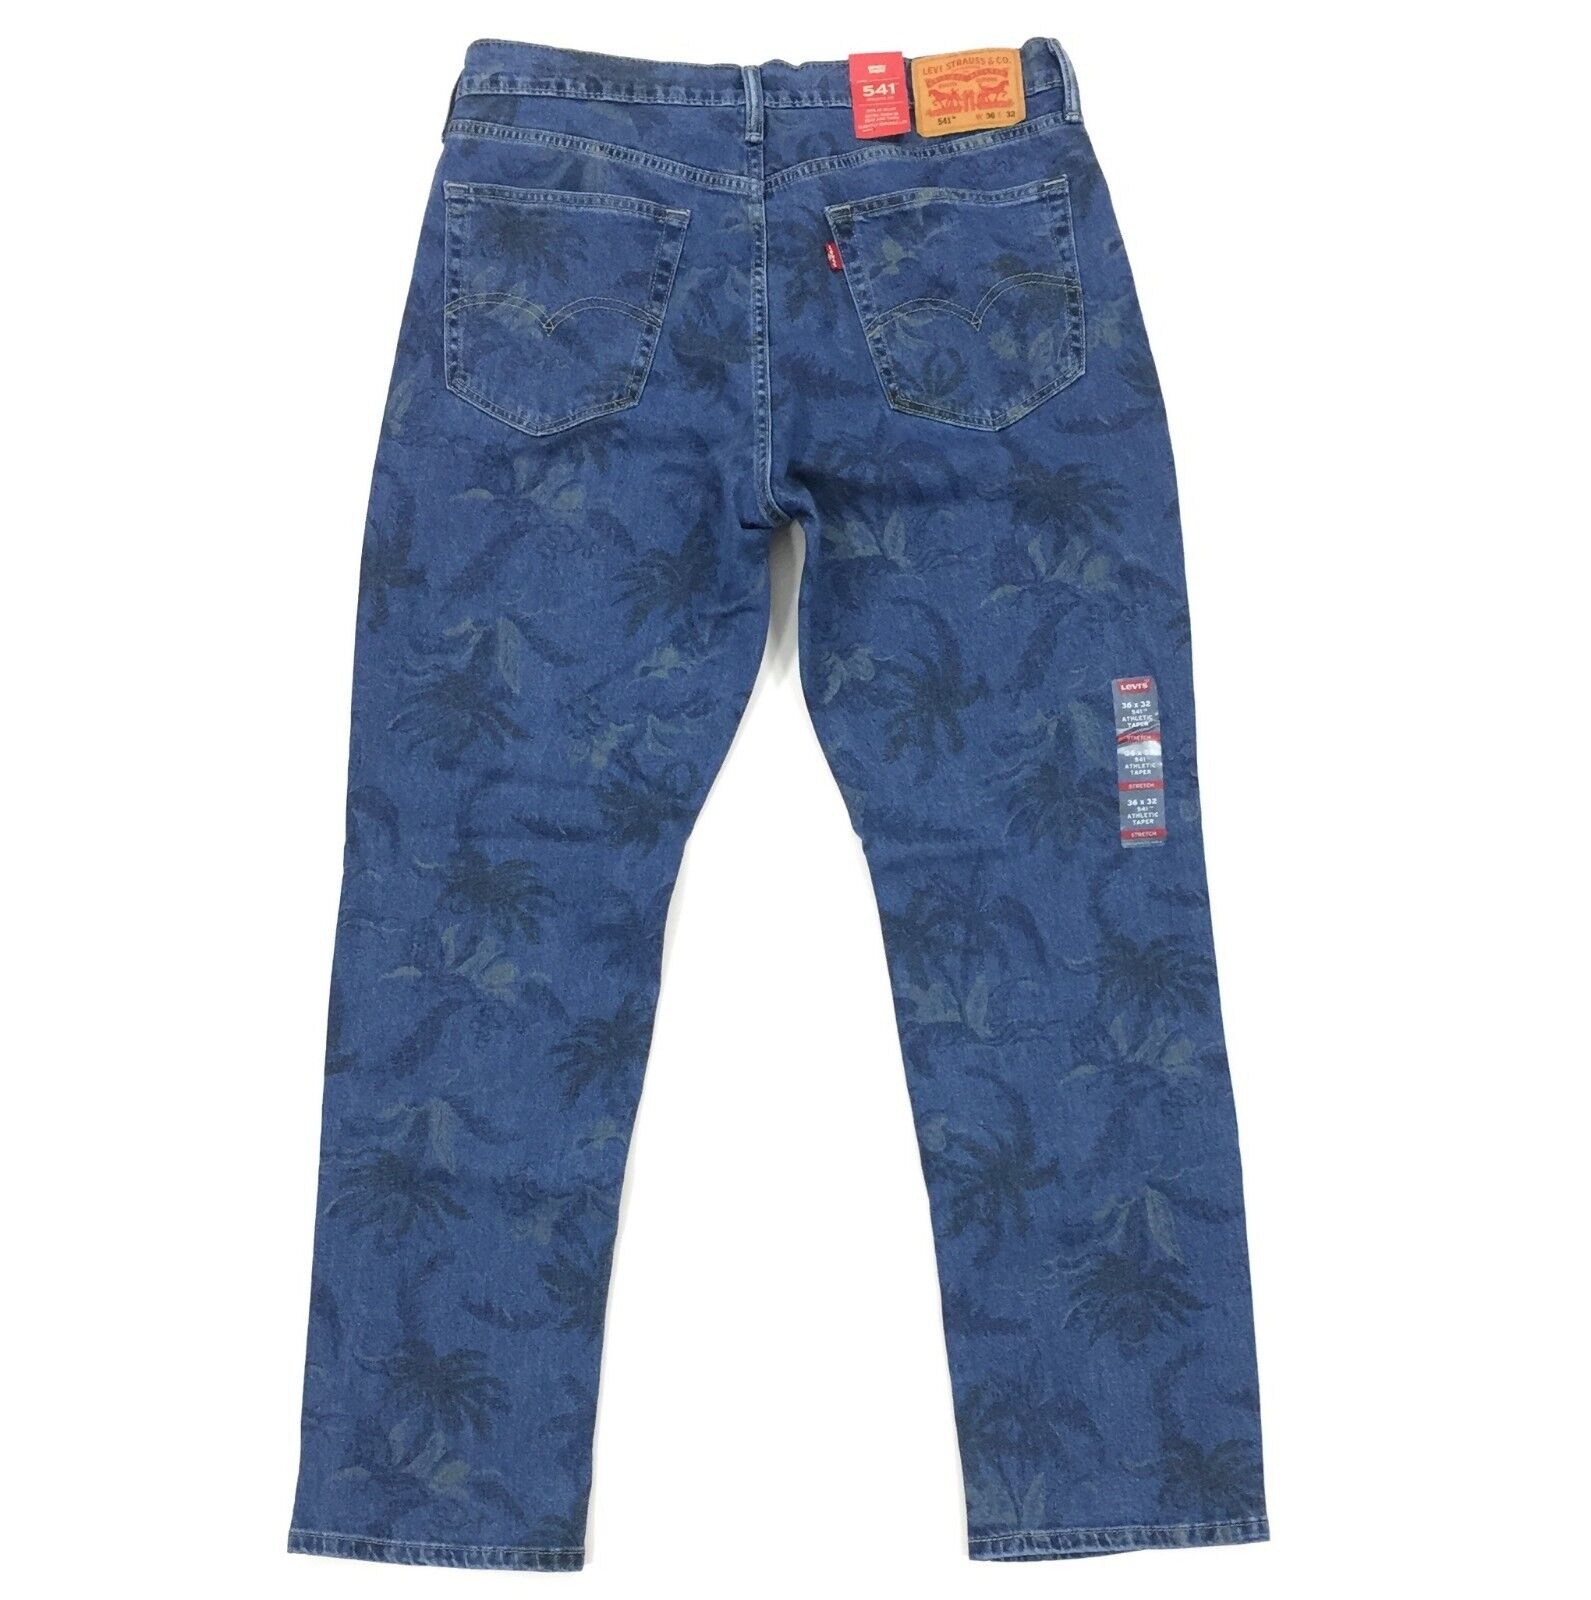 New Levi's 541 Athletic Fit Jeans ALL SIZES Stretch Fit Floral Denim ...